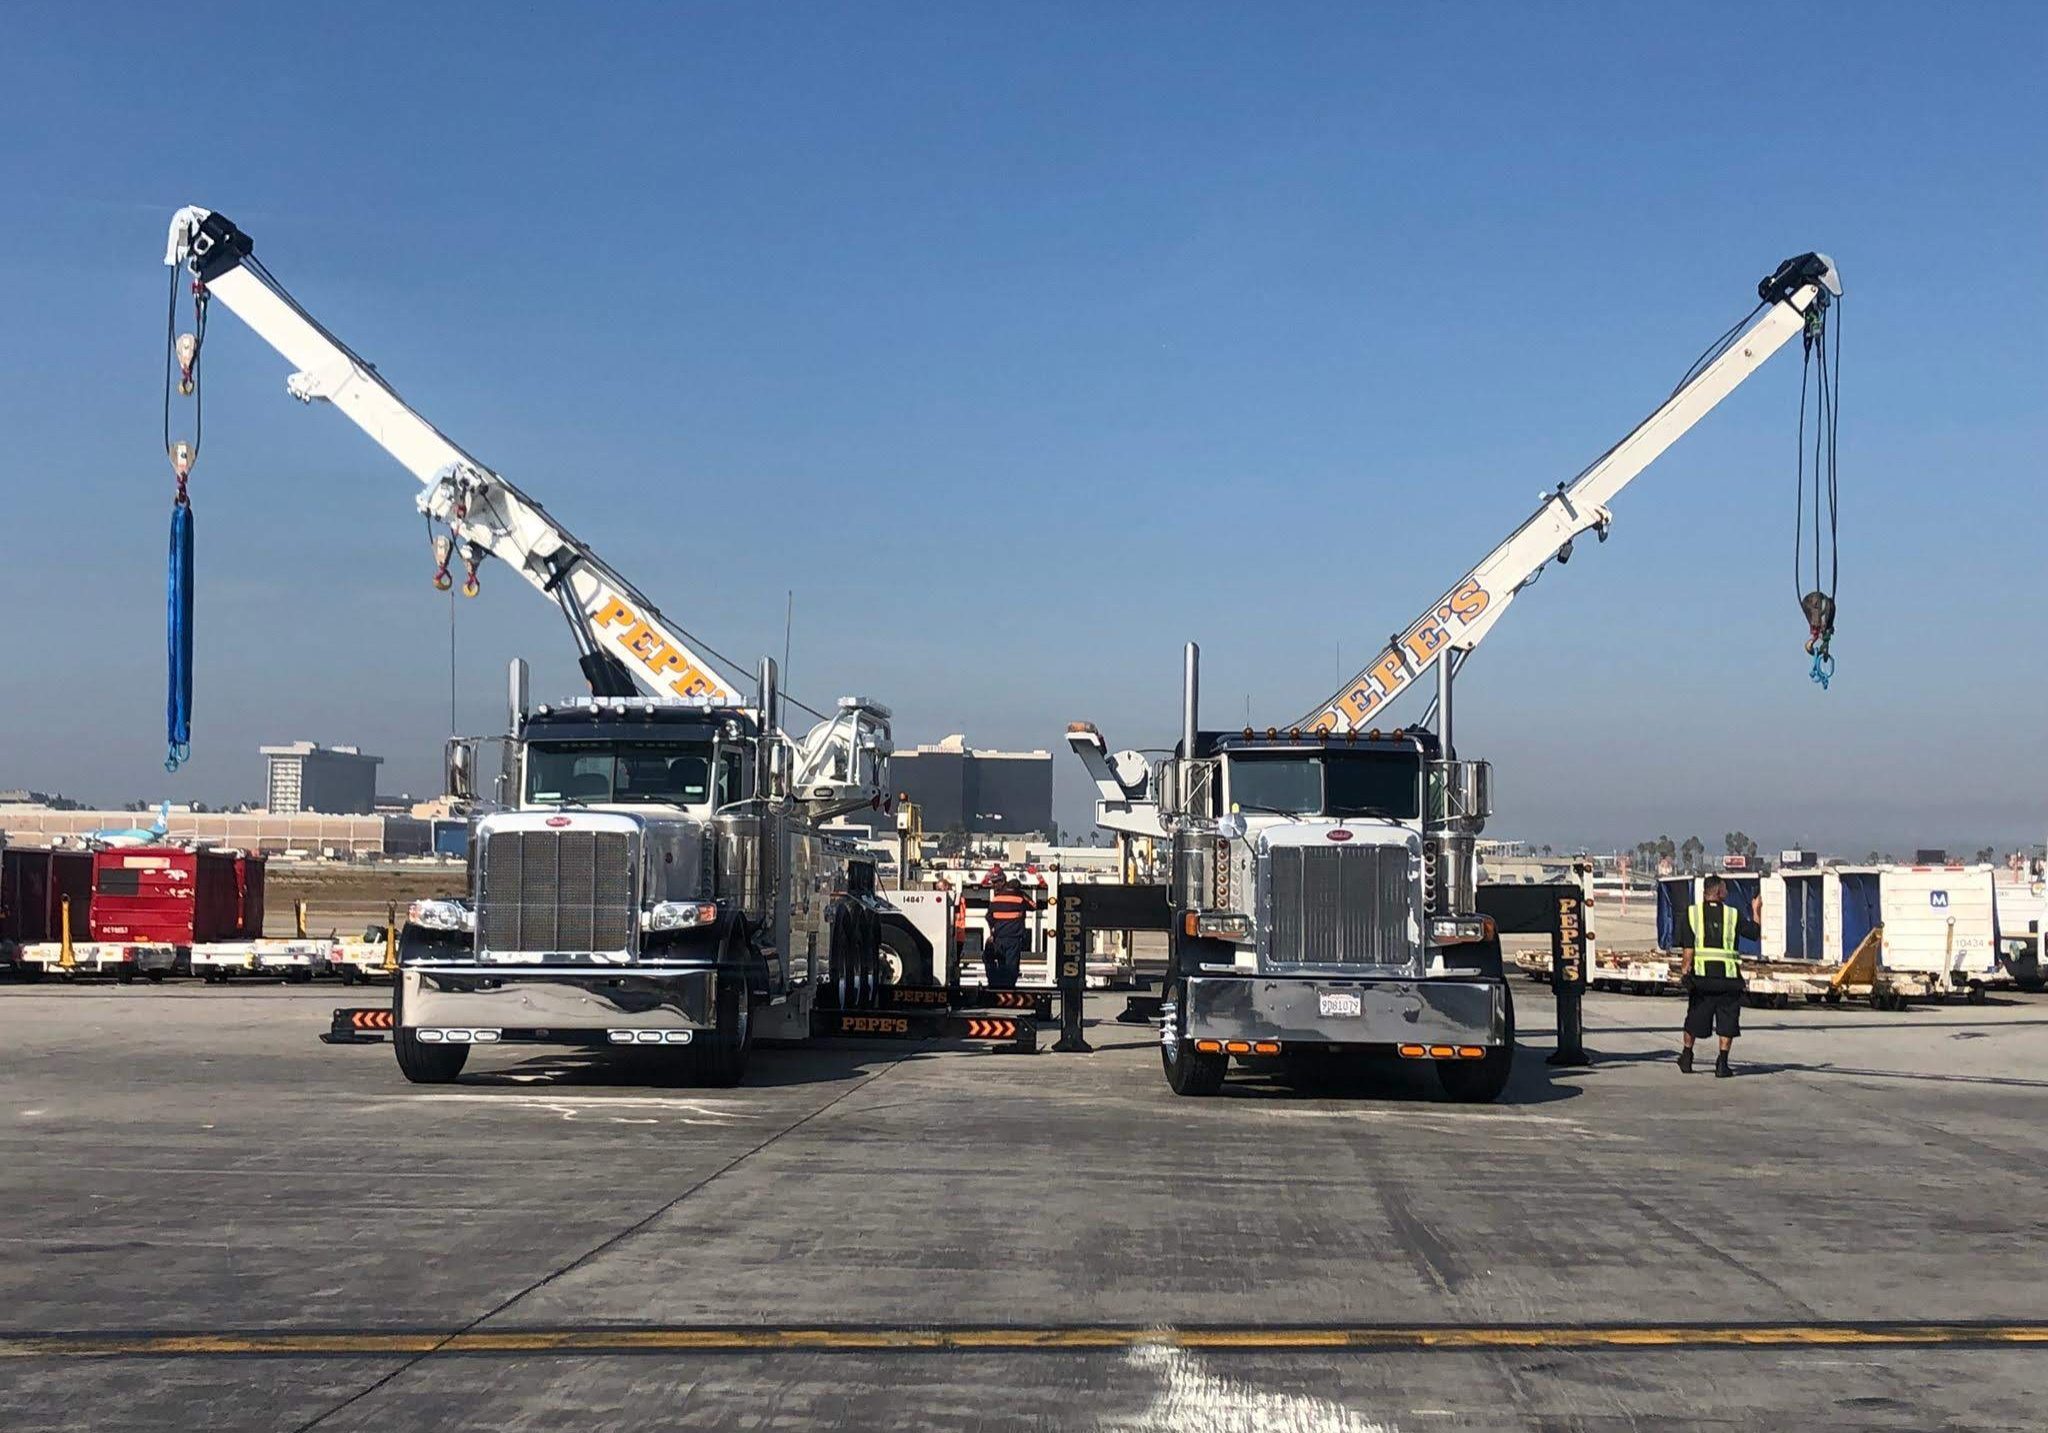 LAX towing and lifts